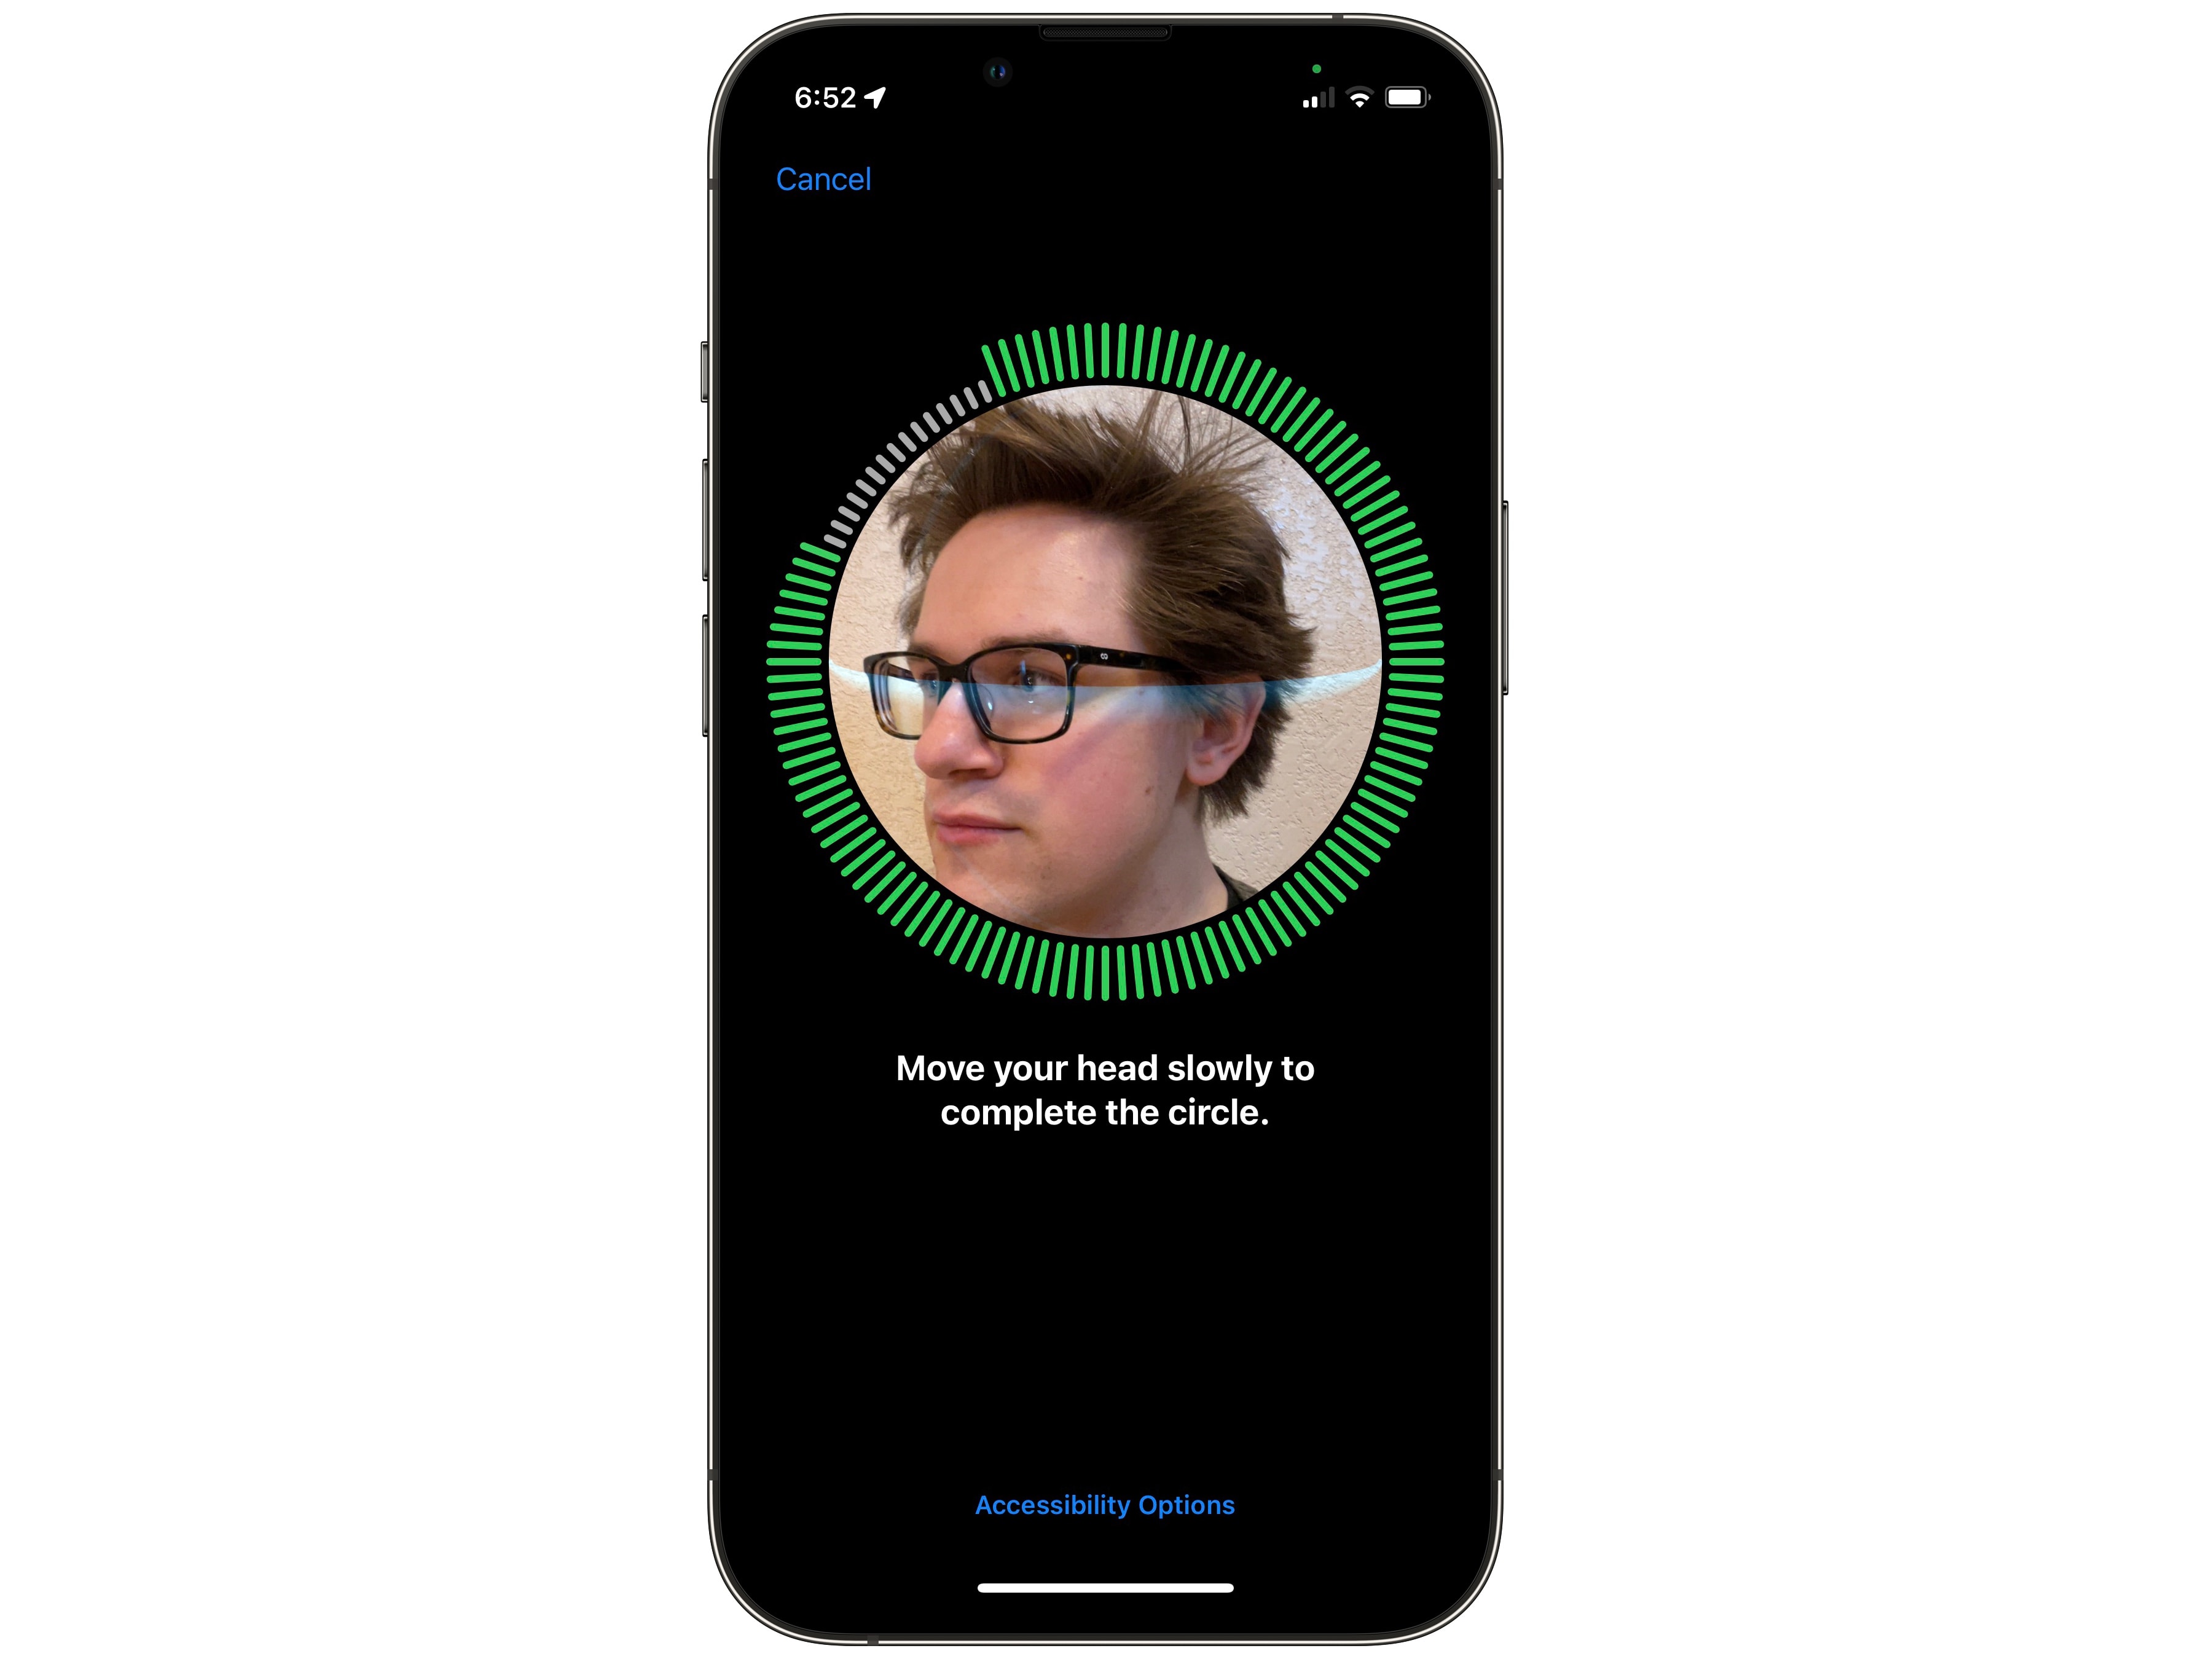 How To Setup Face ID With Sunglasses